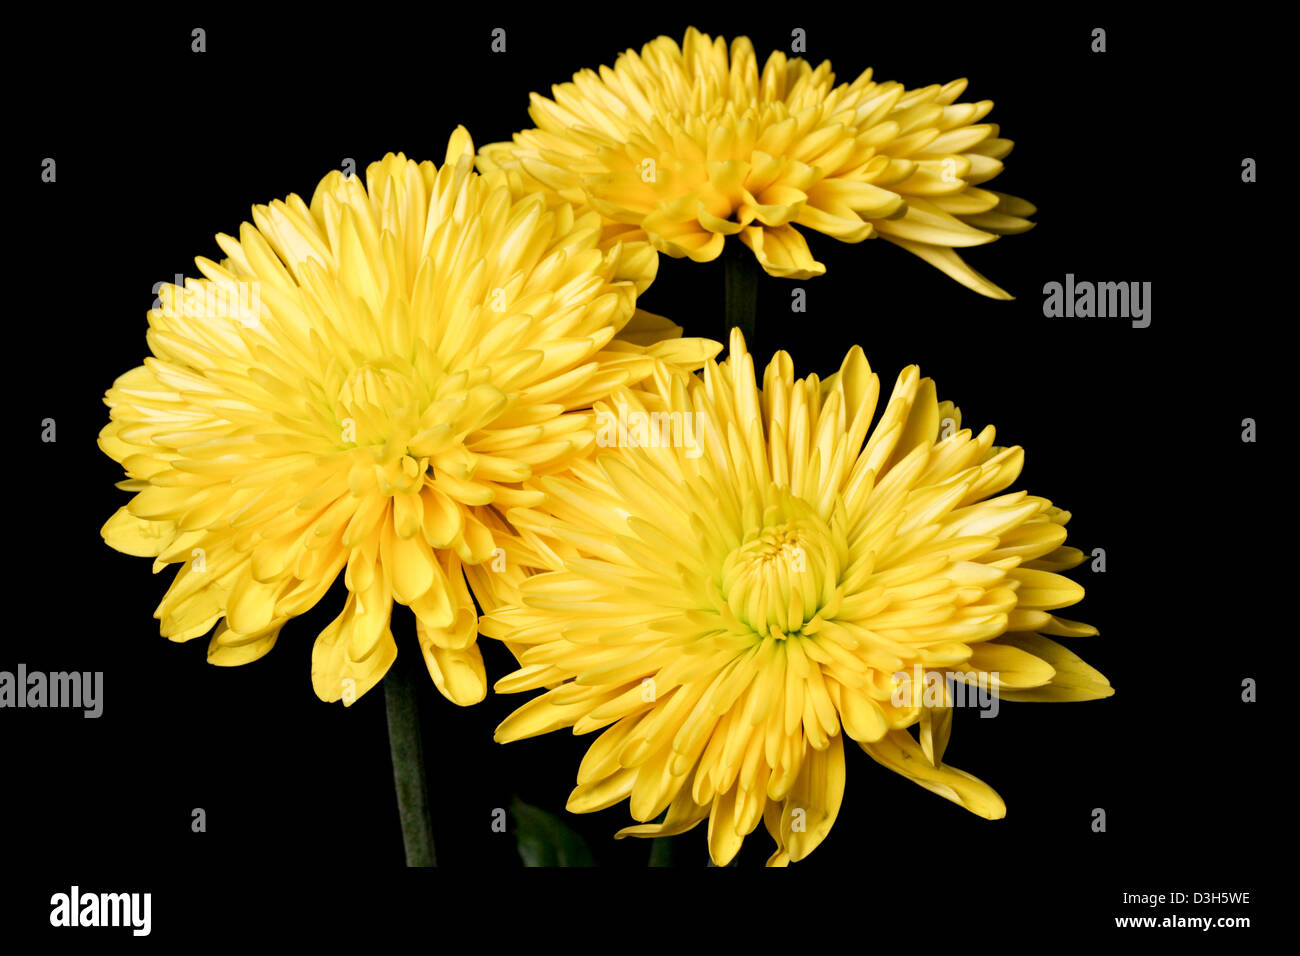 CLose up of yellow spider mum against a black background Stock Photo